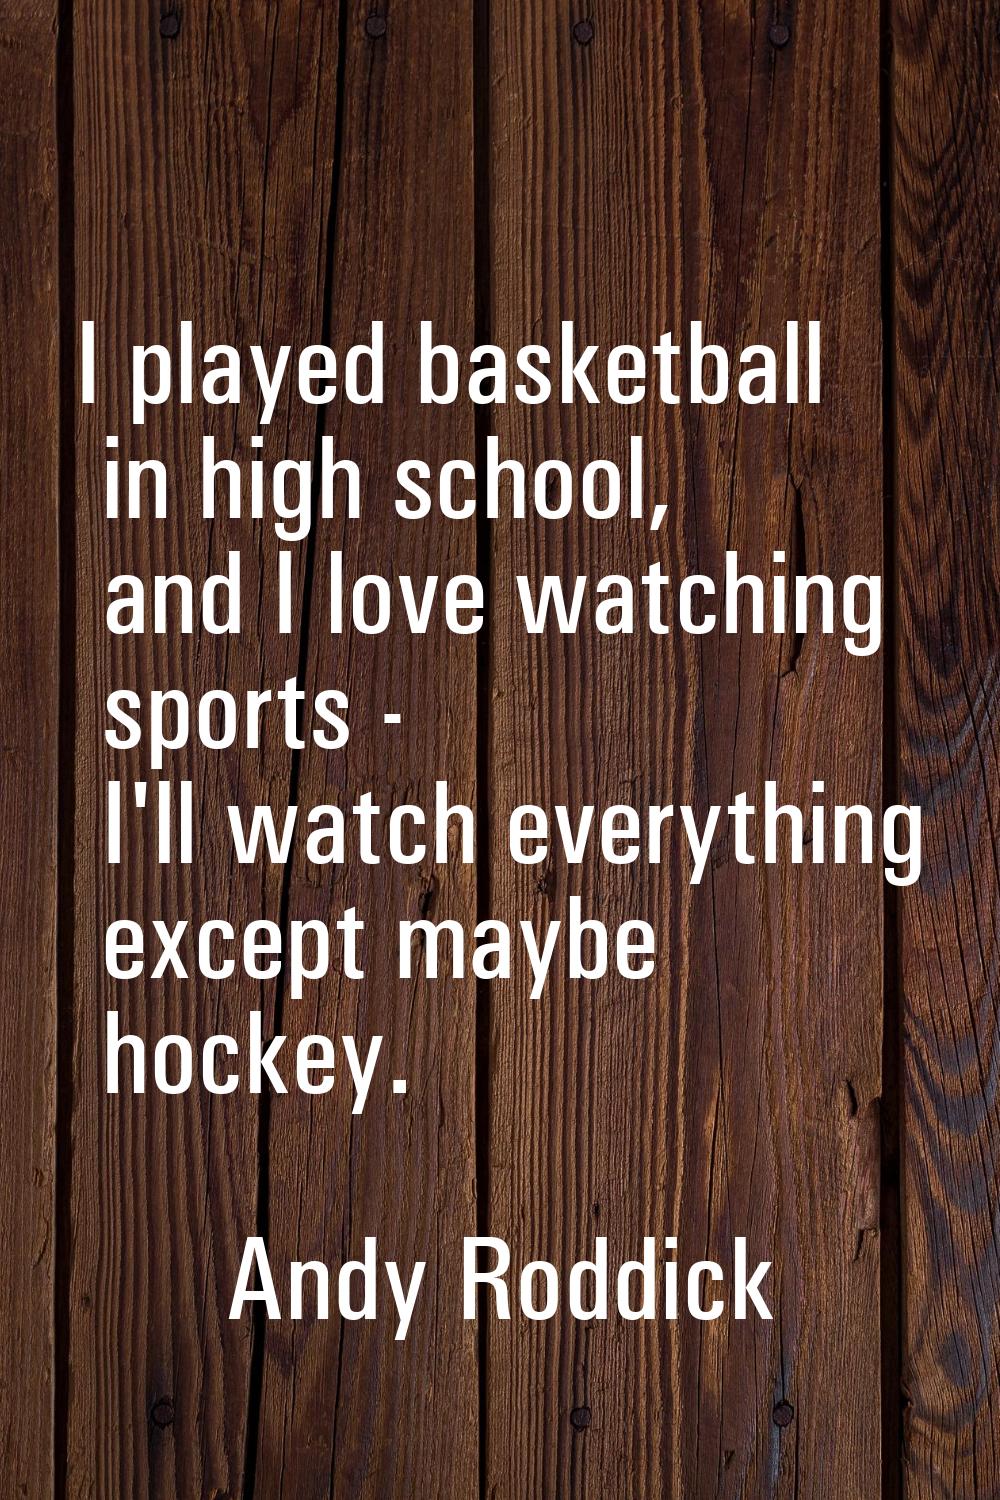 I played basketball in high school, and I love watching sports - I'll watch everything except maybe